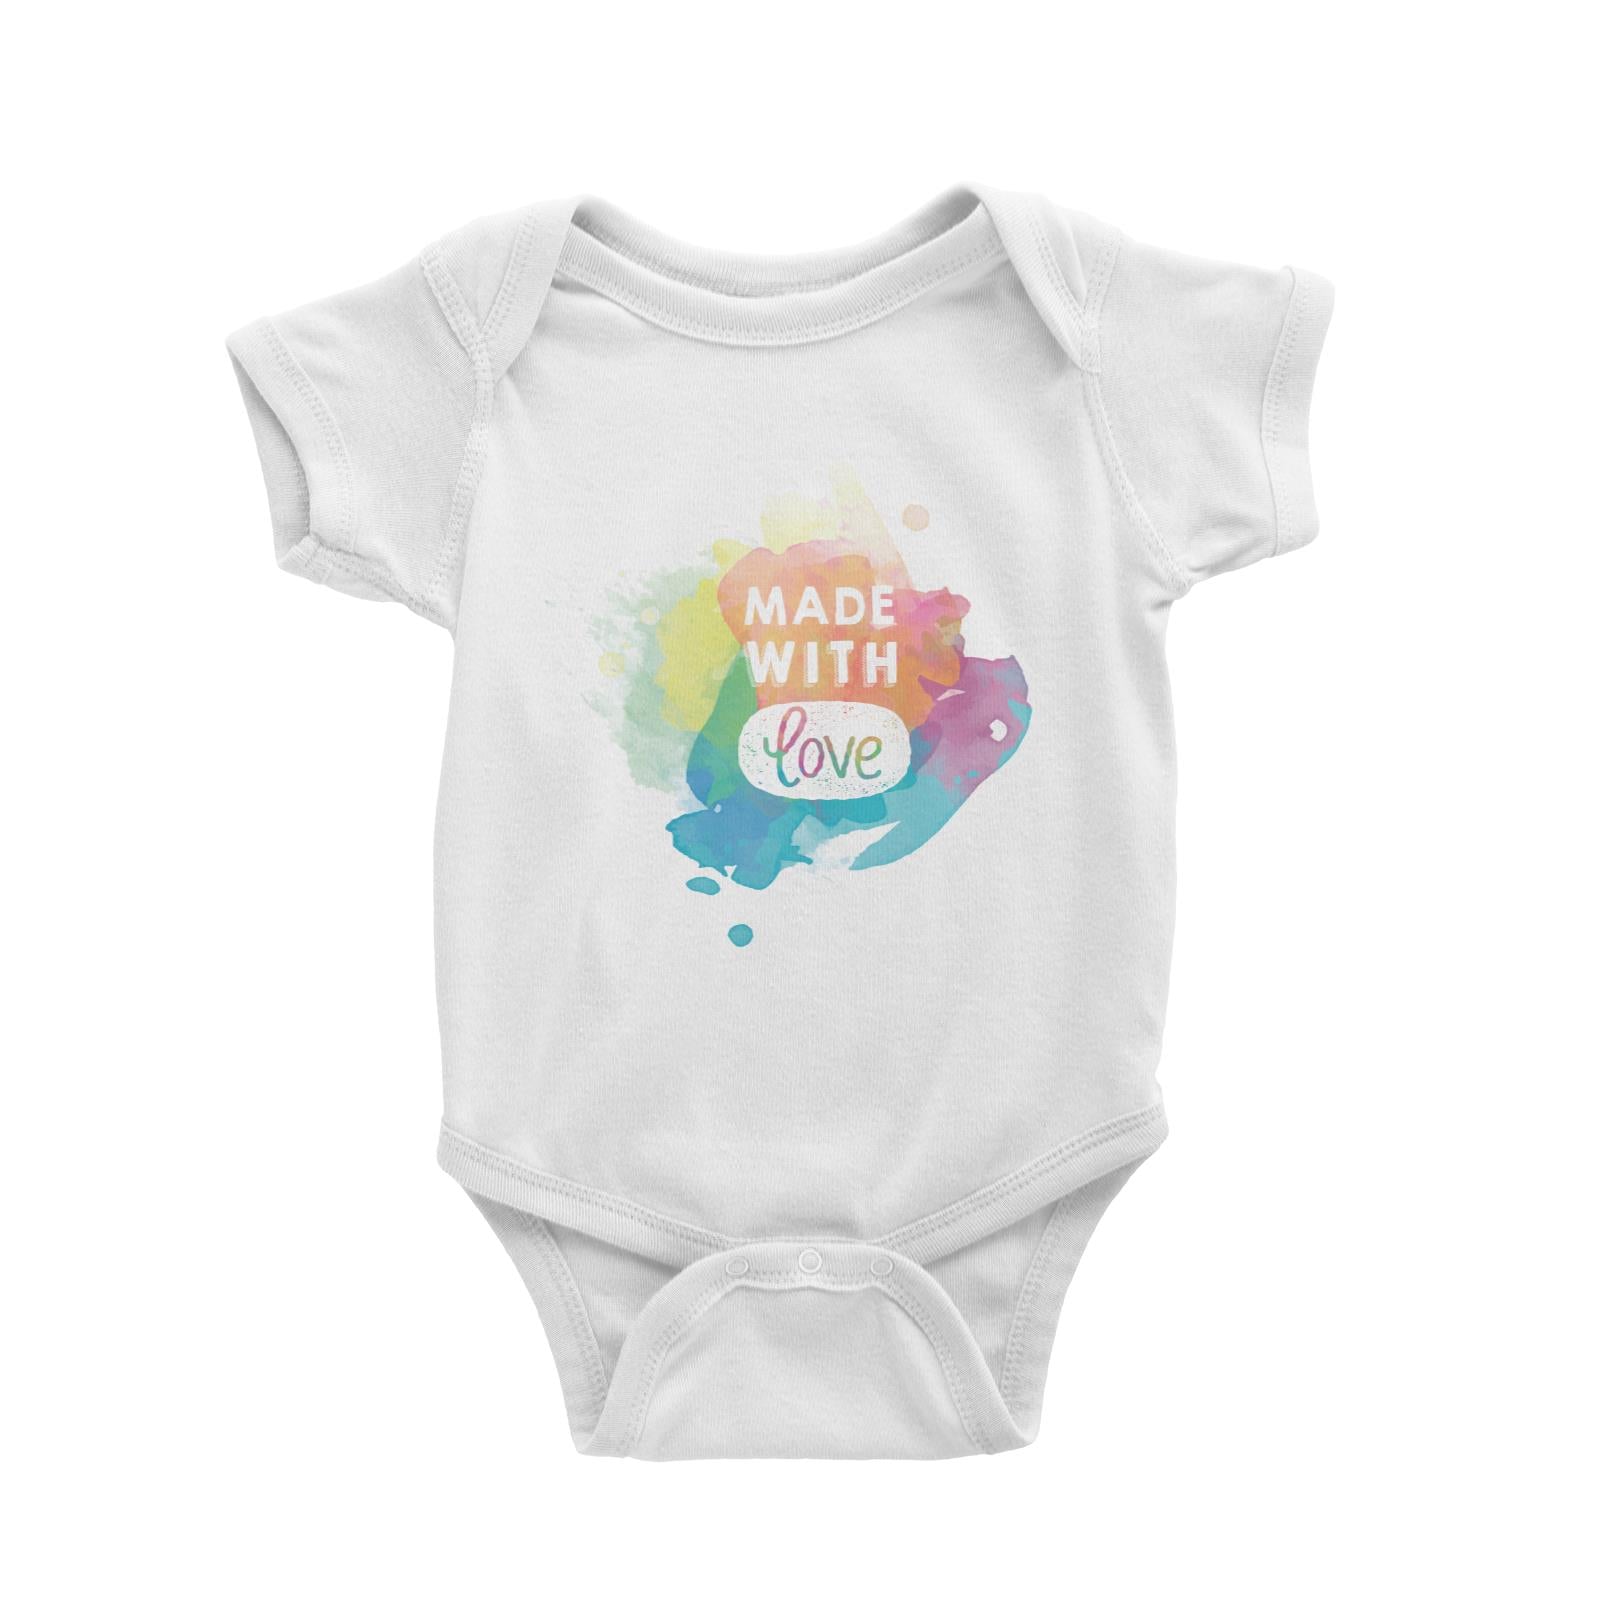 Made With Love White Baby Romper